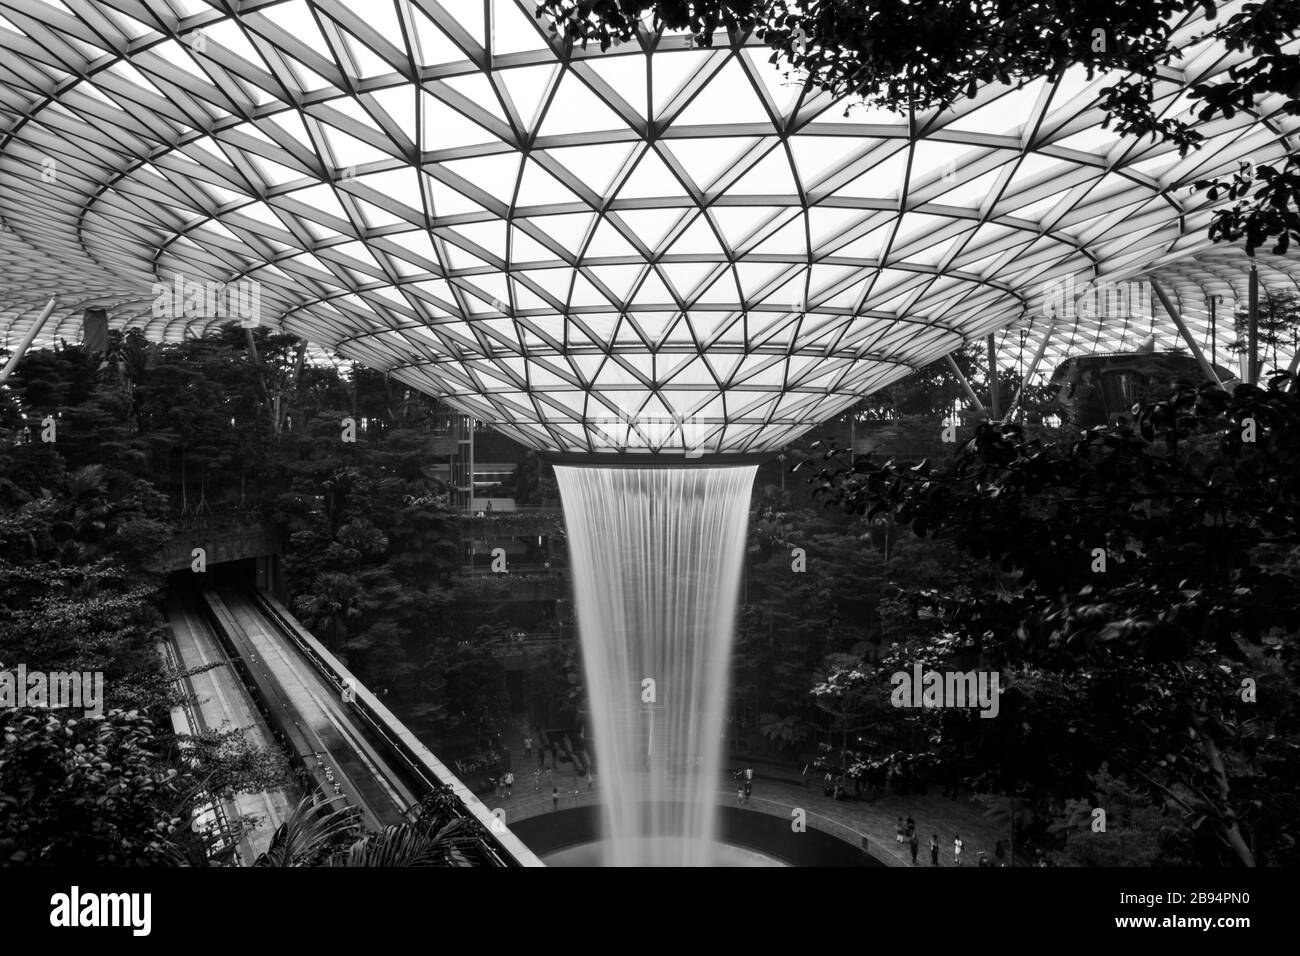 Jewel Changi Airport, Singapore. Jewel Changi Airport is a nature-themed entertainment and retail complex on the landside of Changi Airport. Stock Photo